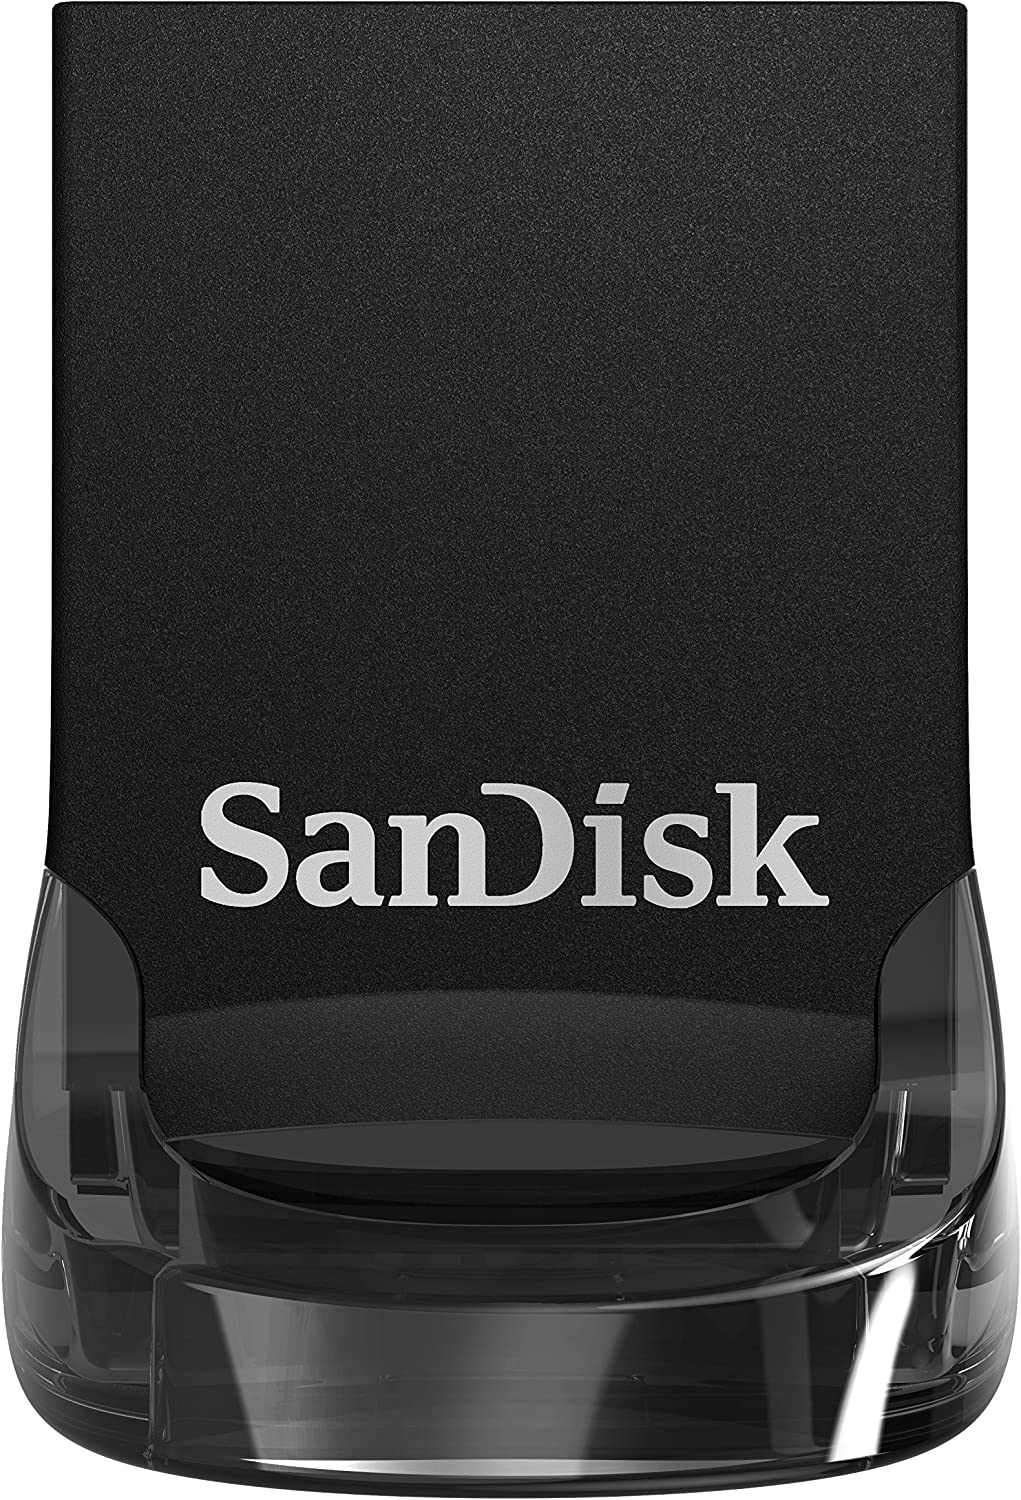 SanDisk 128GB Ultra Fit USB 3.1 Flash Drive - SDCZ430-128G-G46 $14.79 at Amazon  Free Ship with Prime